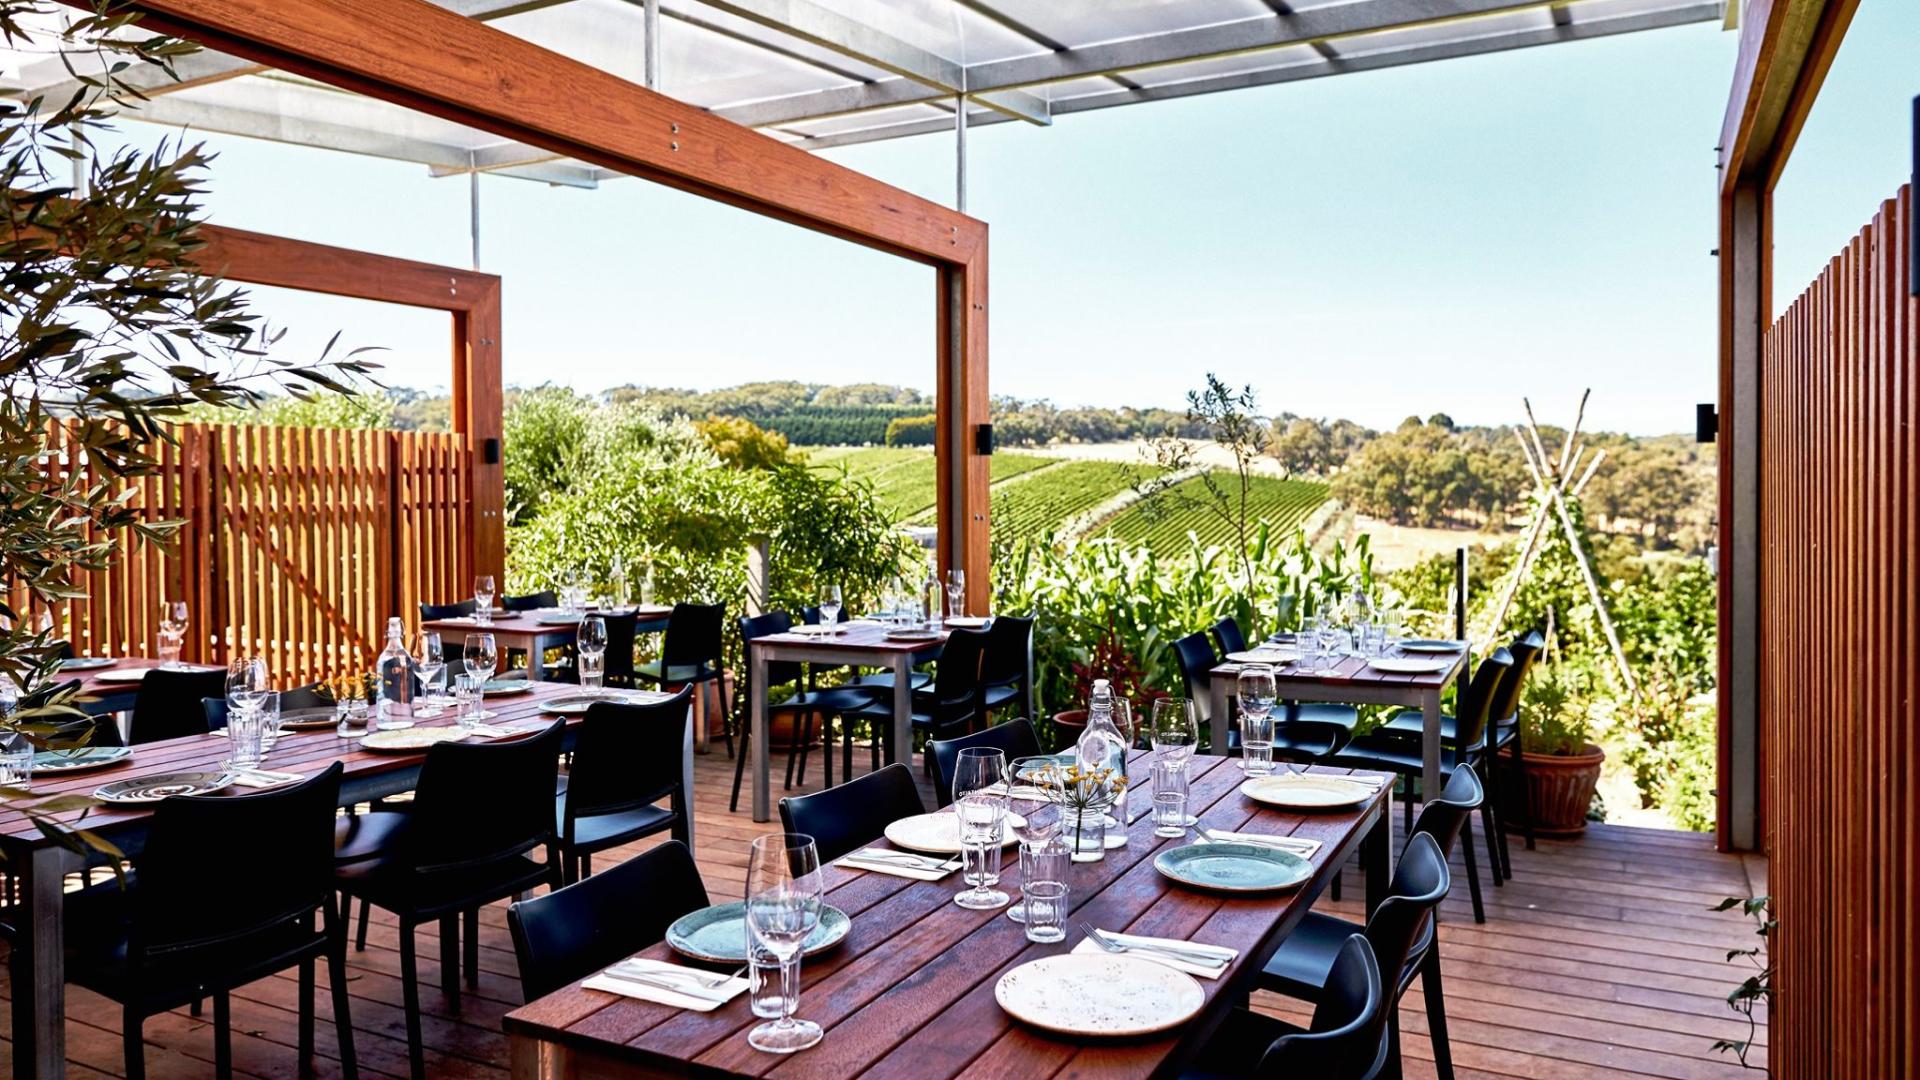 Function Rooms for Hire on the Mornington Peninsula